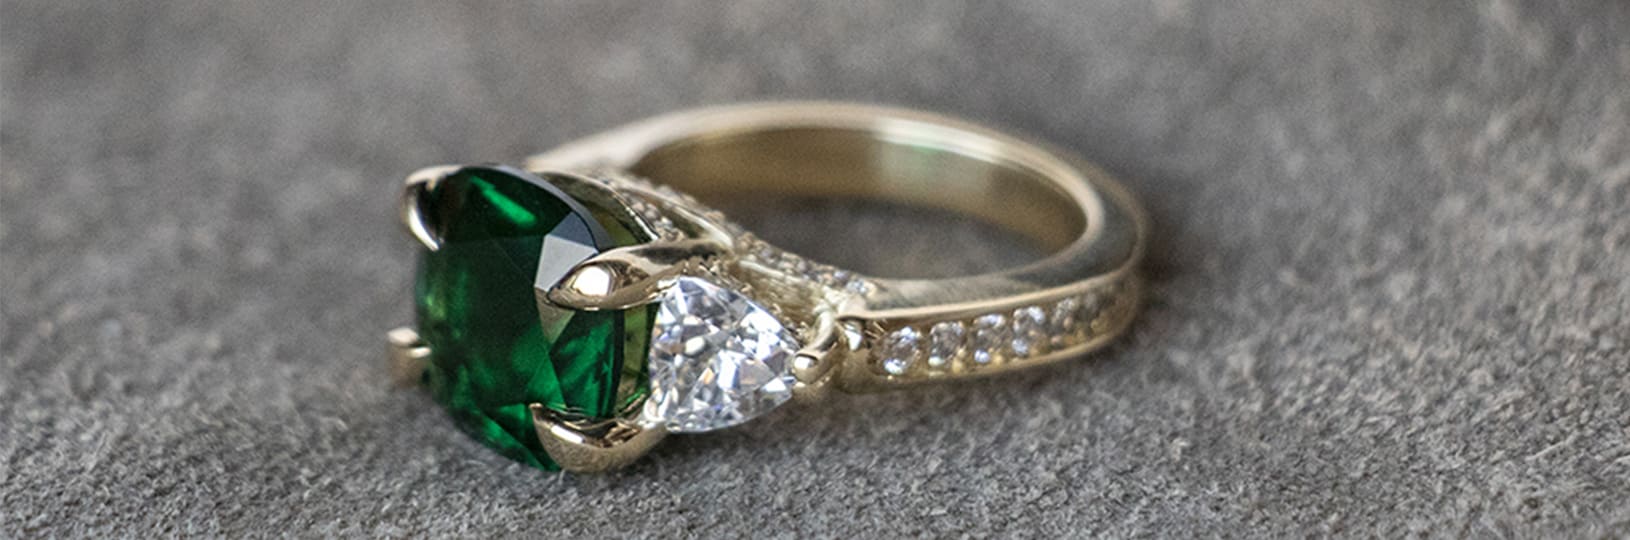 A three stone vintage engagement ring with an accented band